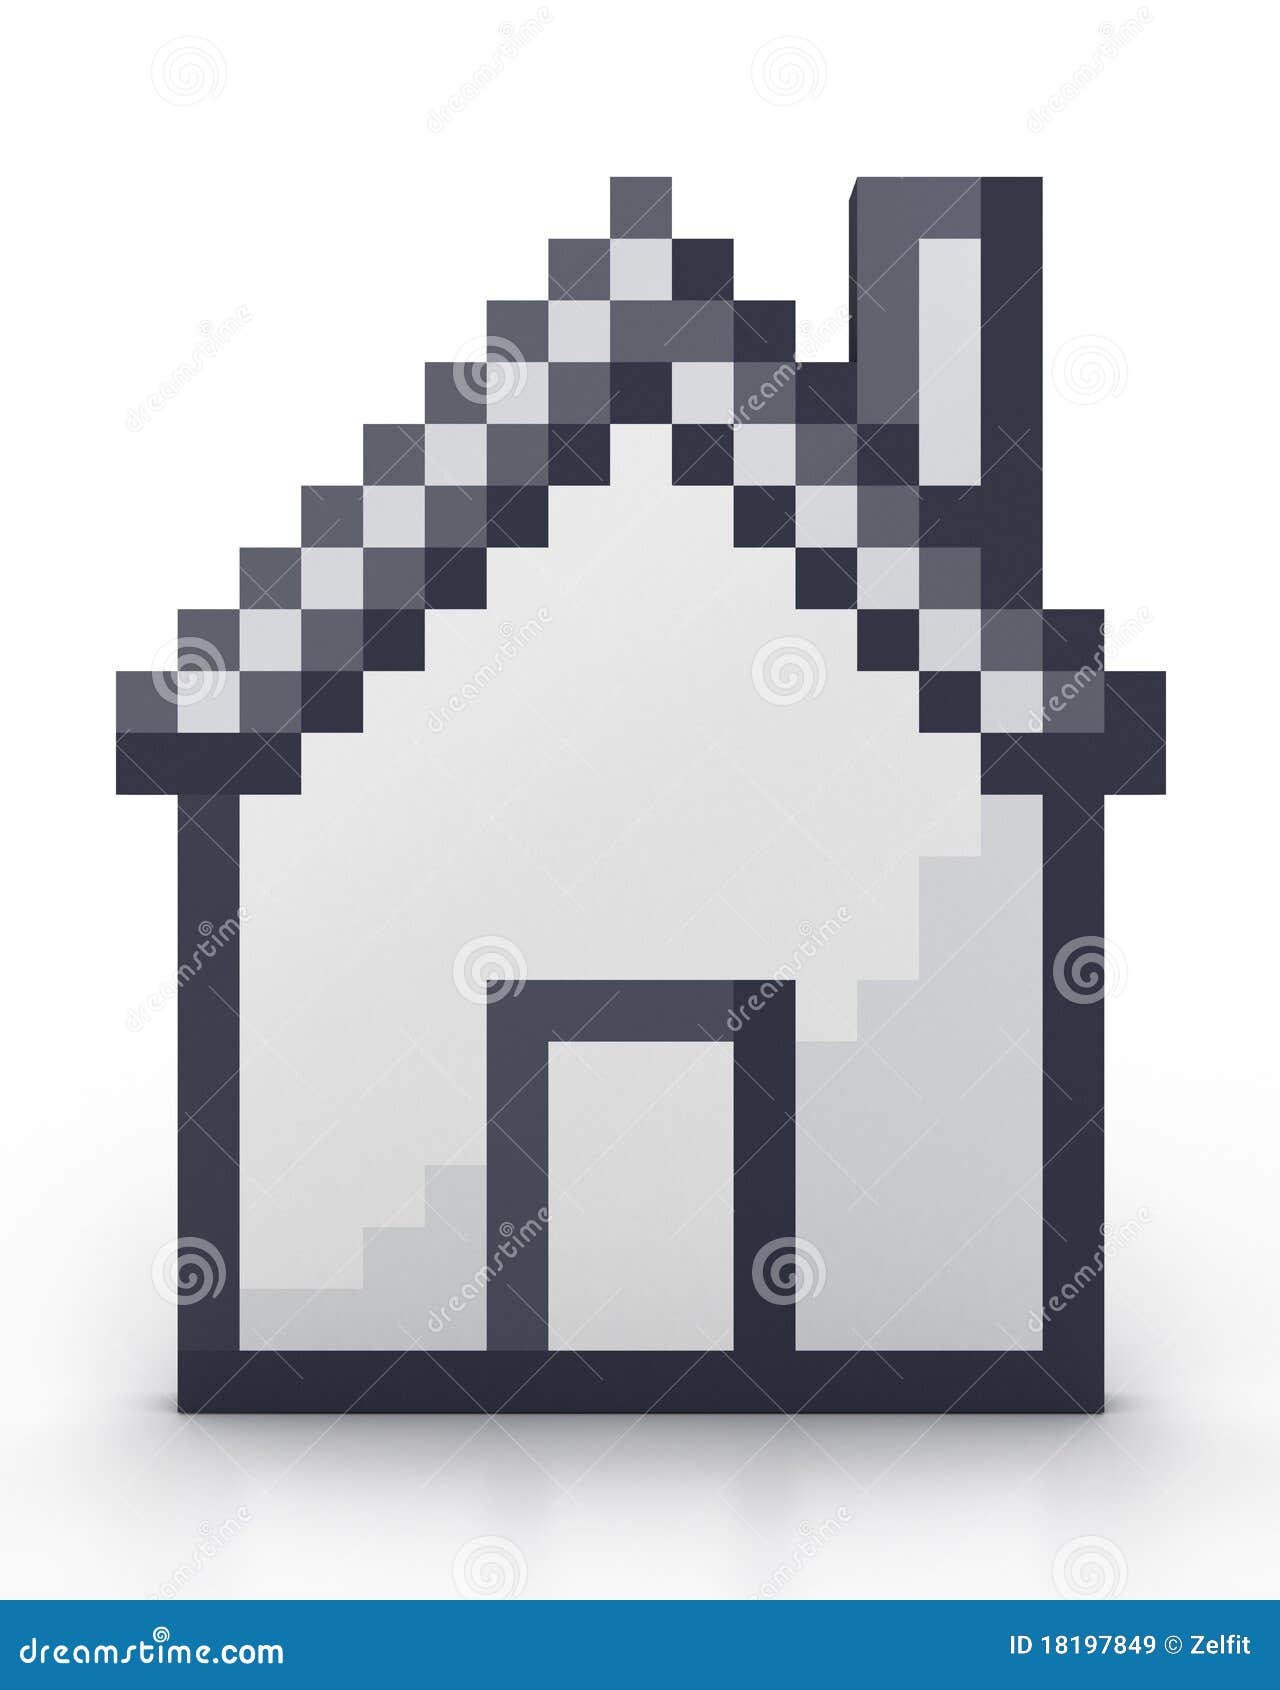 pixelated house frontal view